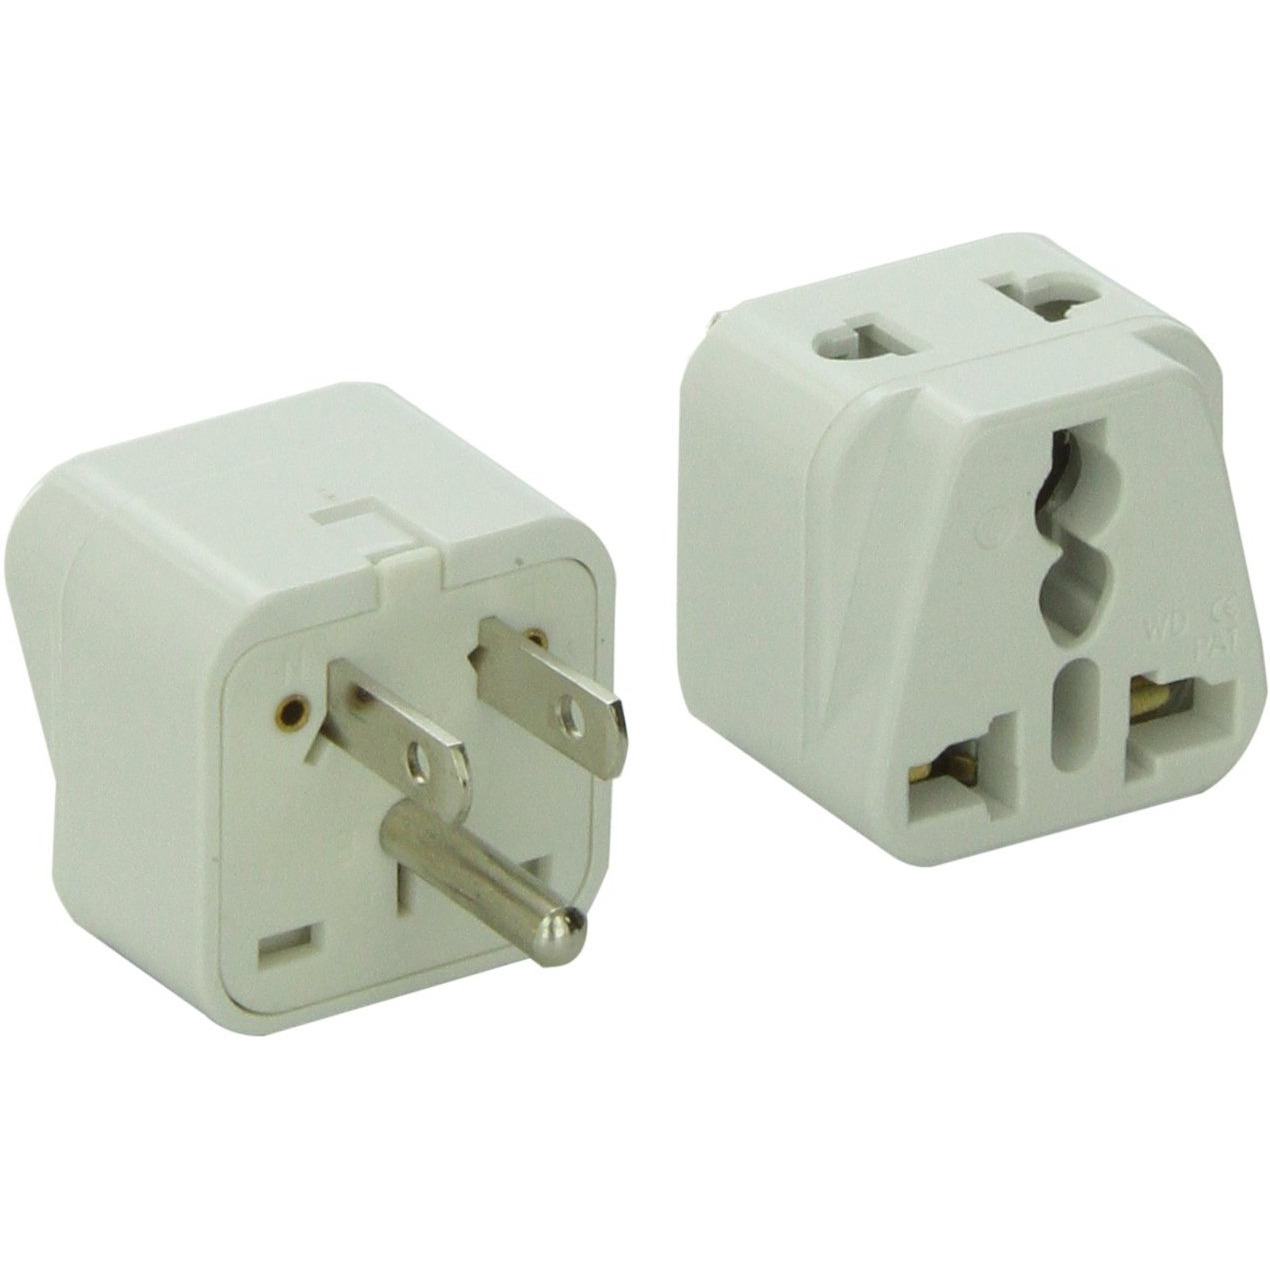 CKITZE BA5-2PK 2 in 1 Grounded Universal to USA Plug Adapter, 2 Pack (Type B)